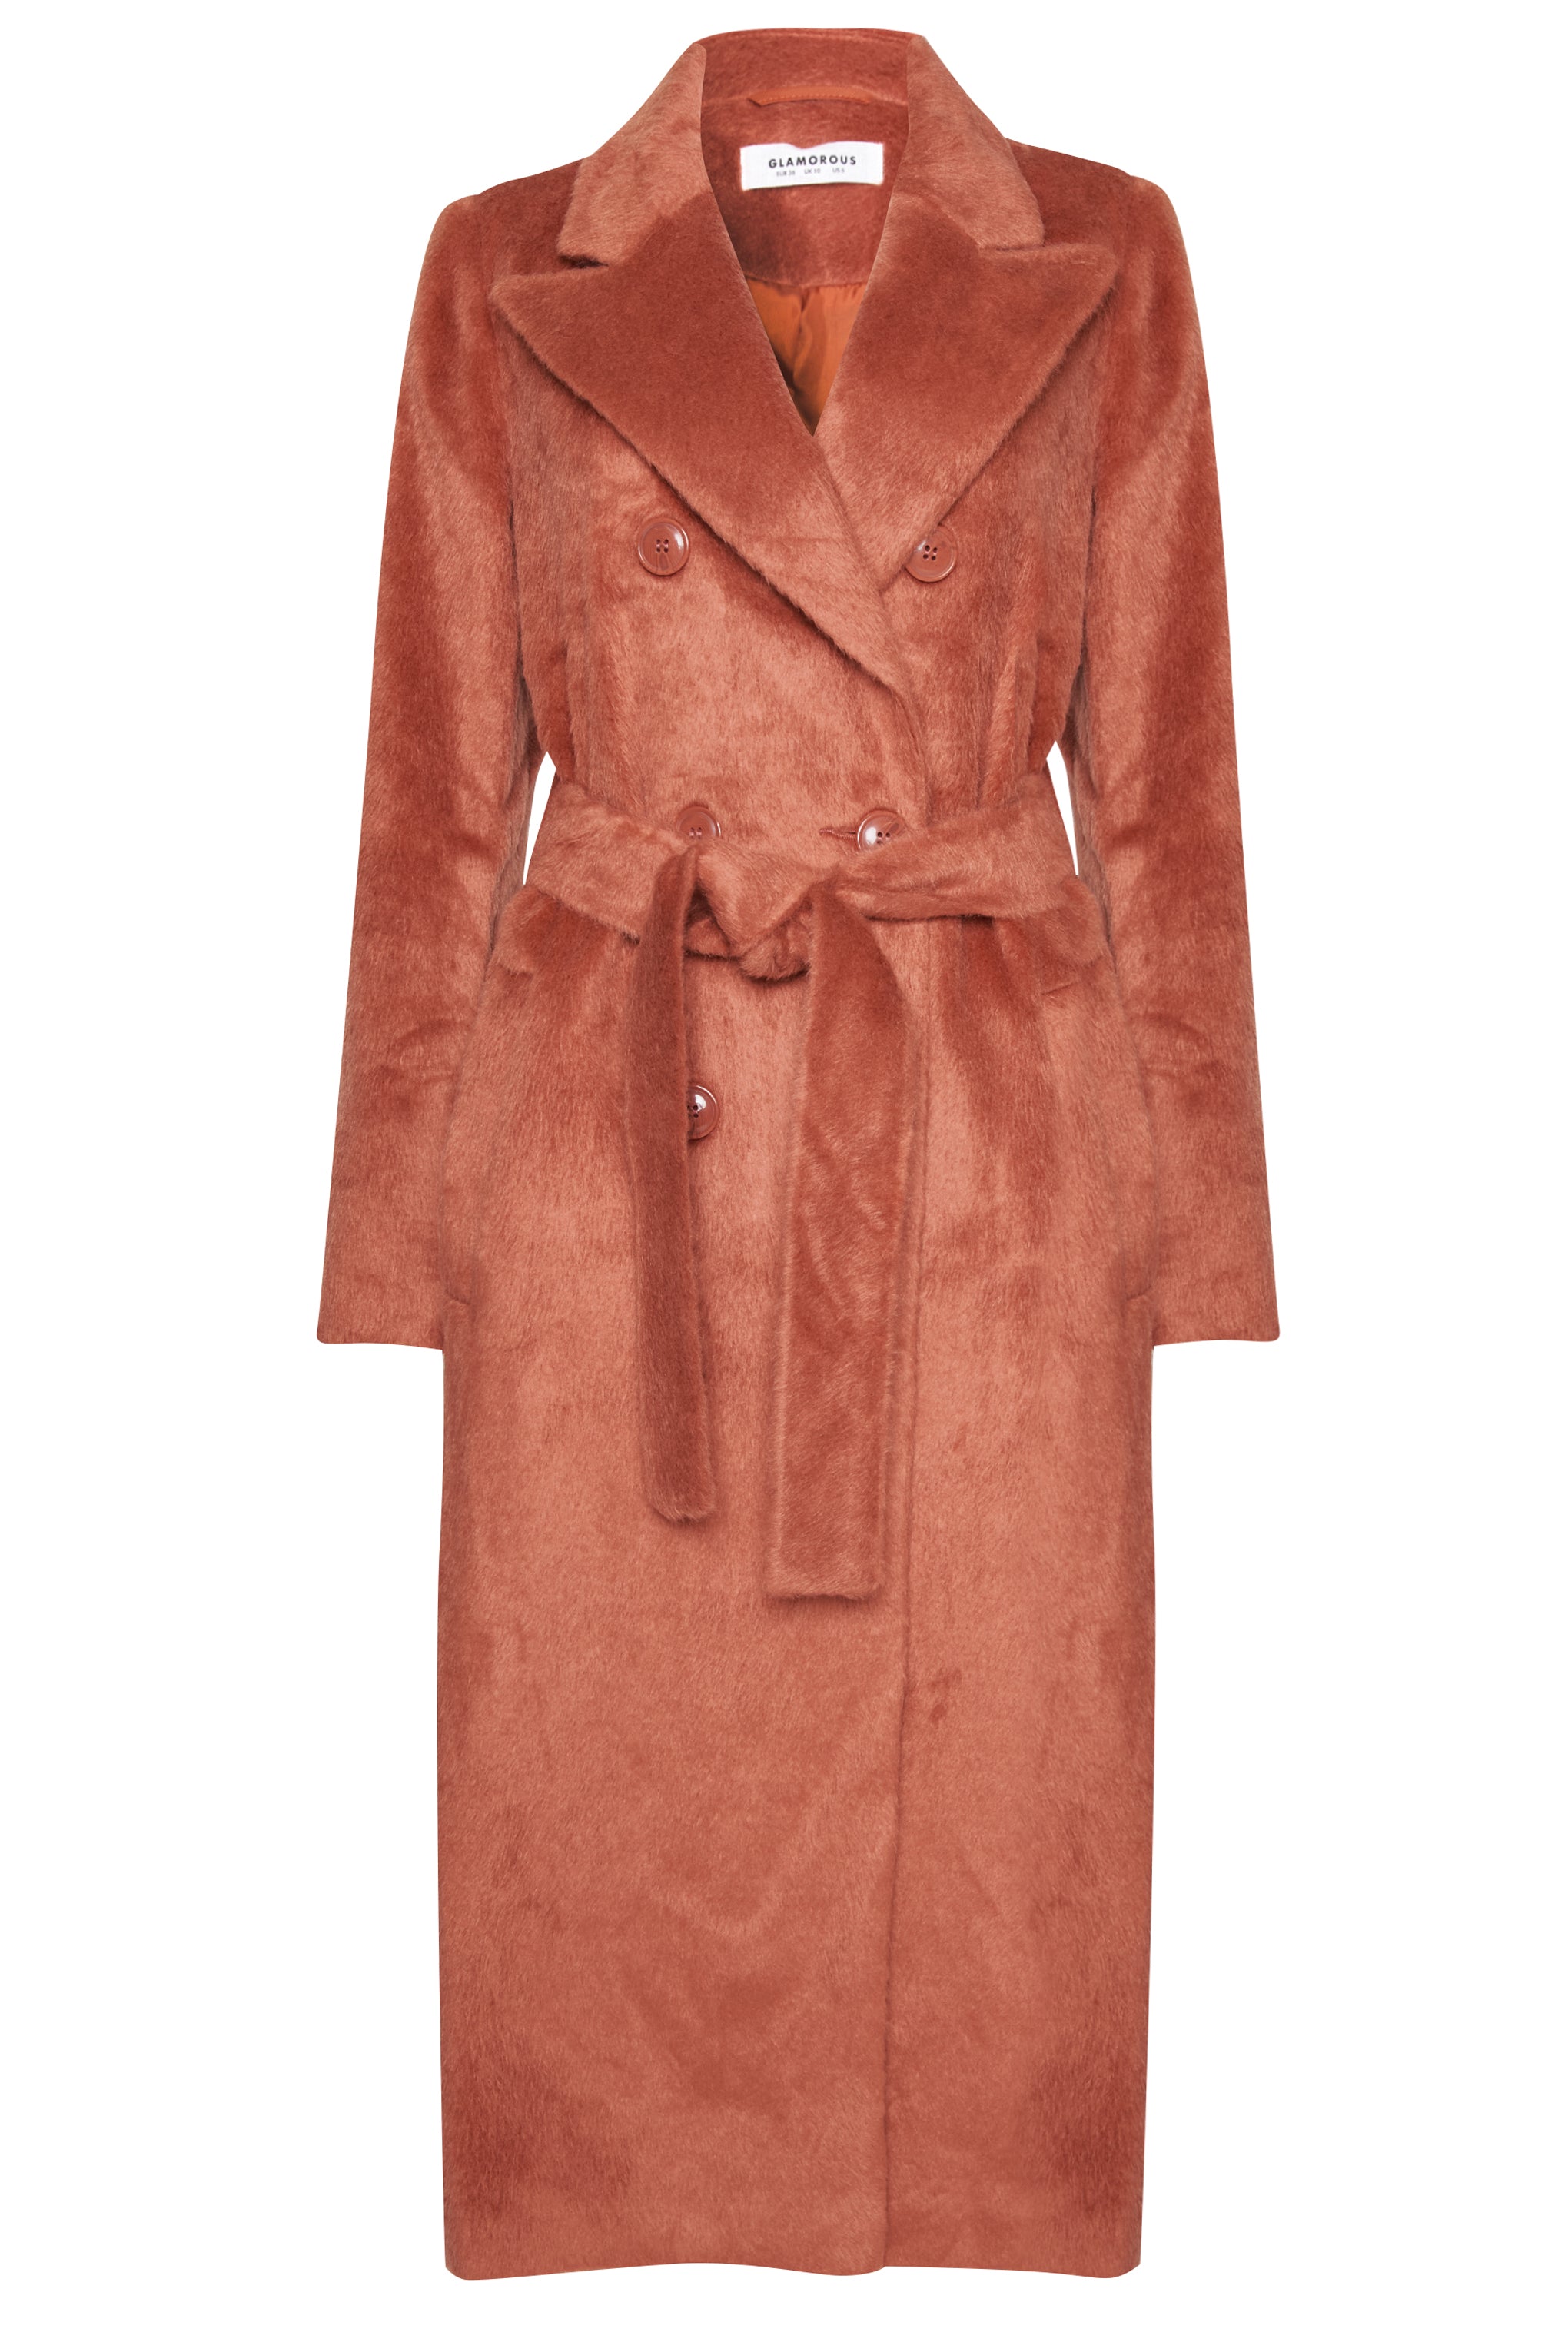 Glamorous Rust Double Breasted Long Line Coat